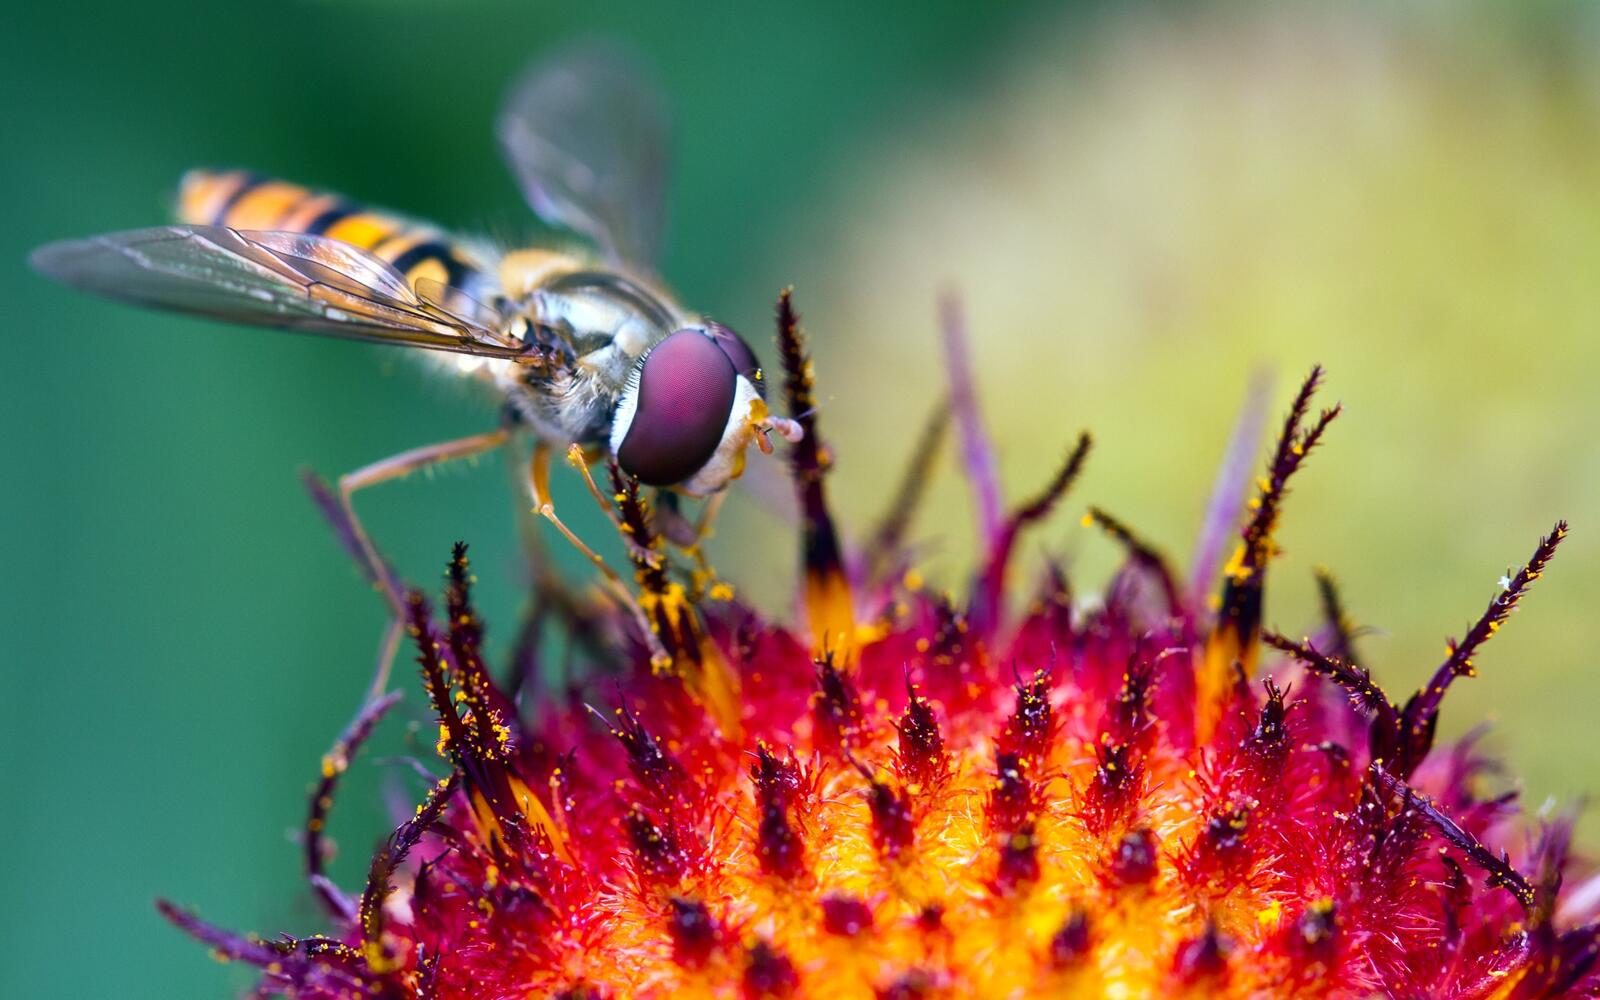 Wallpapers nature photos insect on the desktop